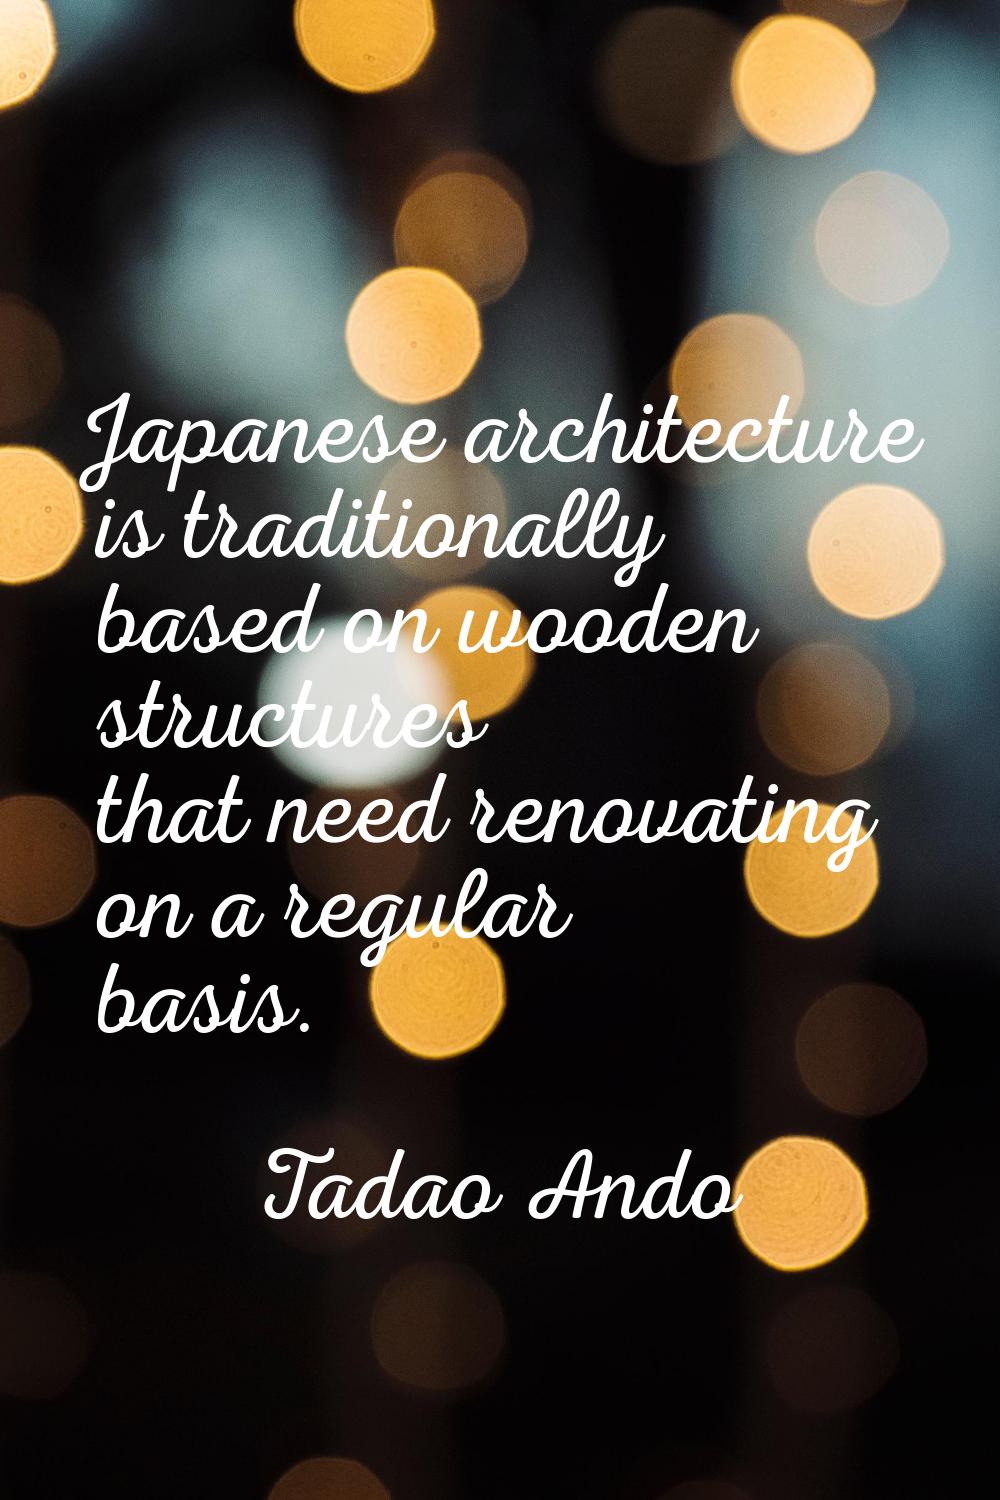 Japanese architecture is traditionally based on wooden structures that need renovating on a regular